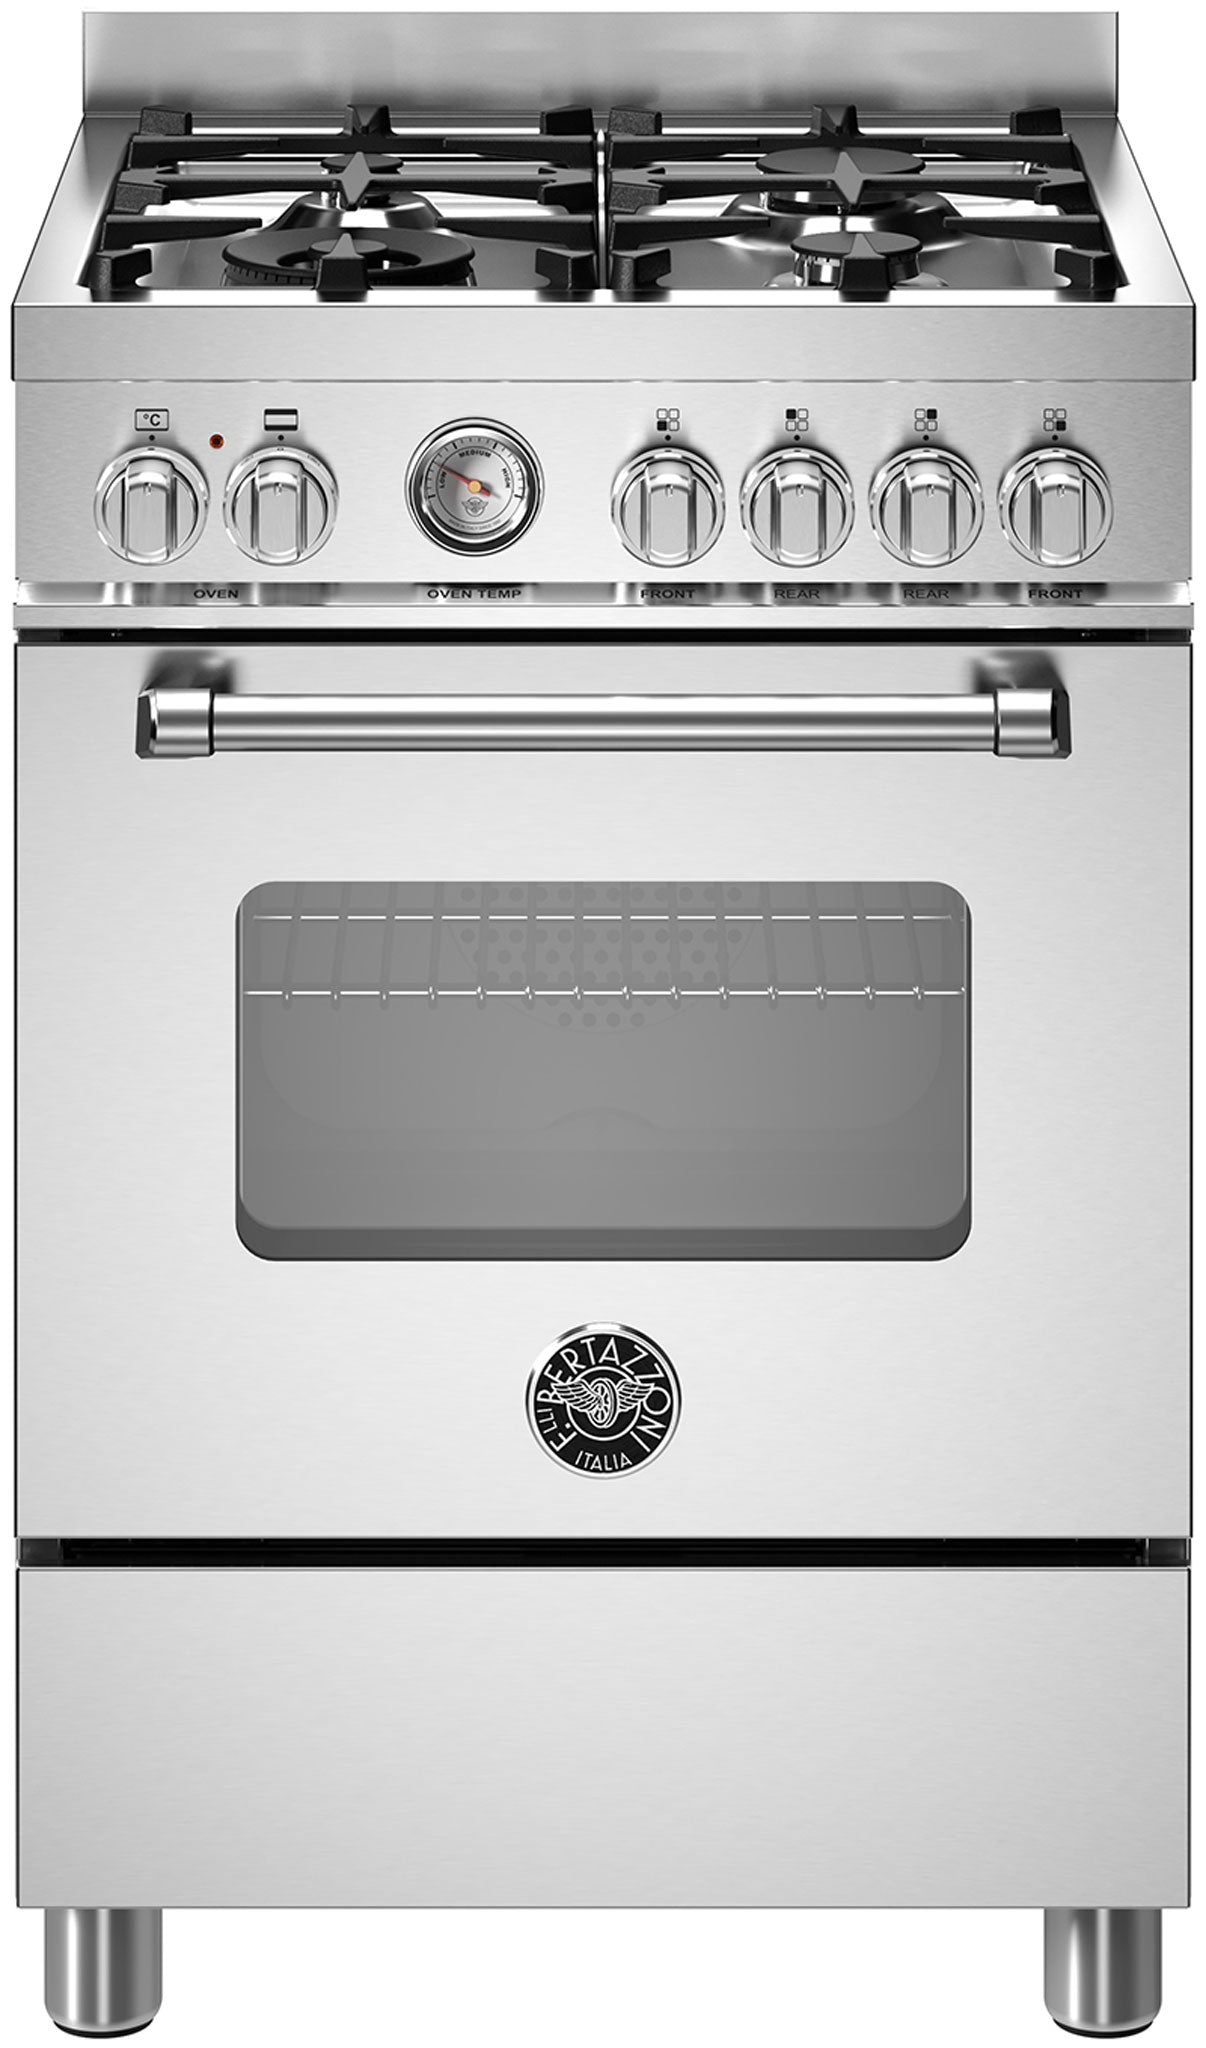 BERTAZZONI MAS64L1EXC 60cm Electric Oven 4 burner Gas Hob Range Cooker  in Stainless Steel